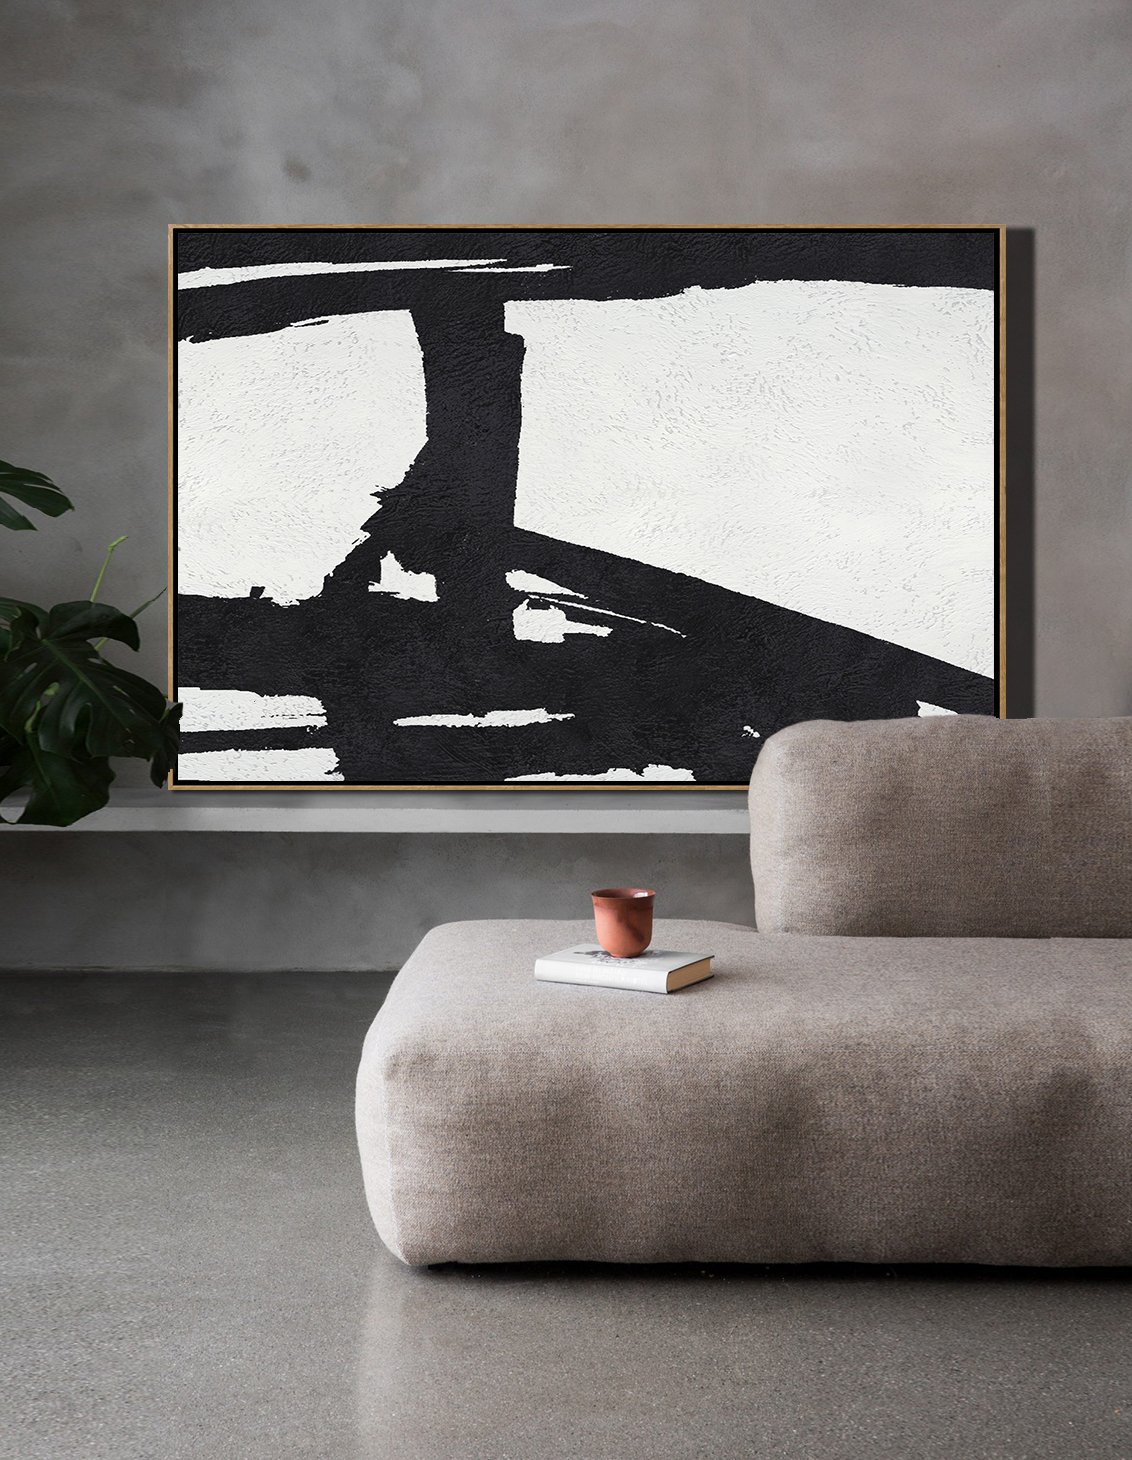 Canvas Artwork For Living Room,Hand Painted Oversized Horizontal Minimal Art On Canvas, Black And White Minimalist Painting - Hand Painted Acrylic Painting